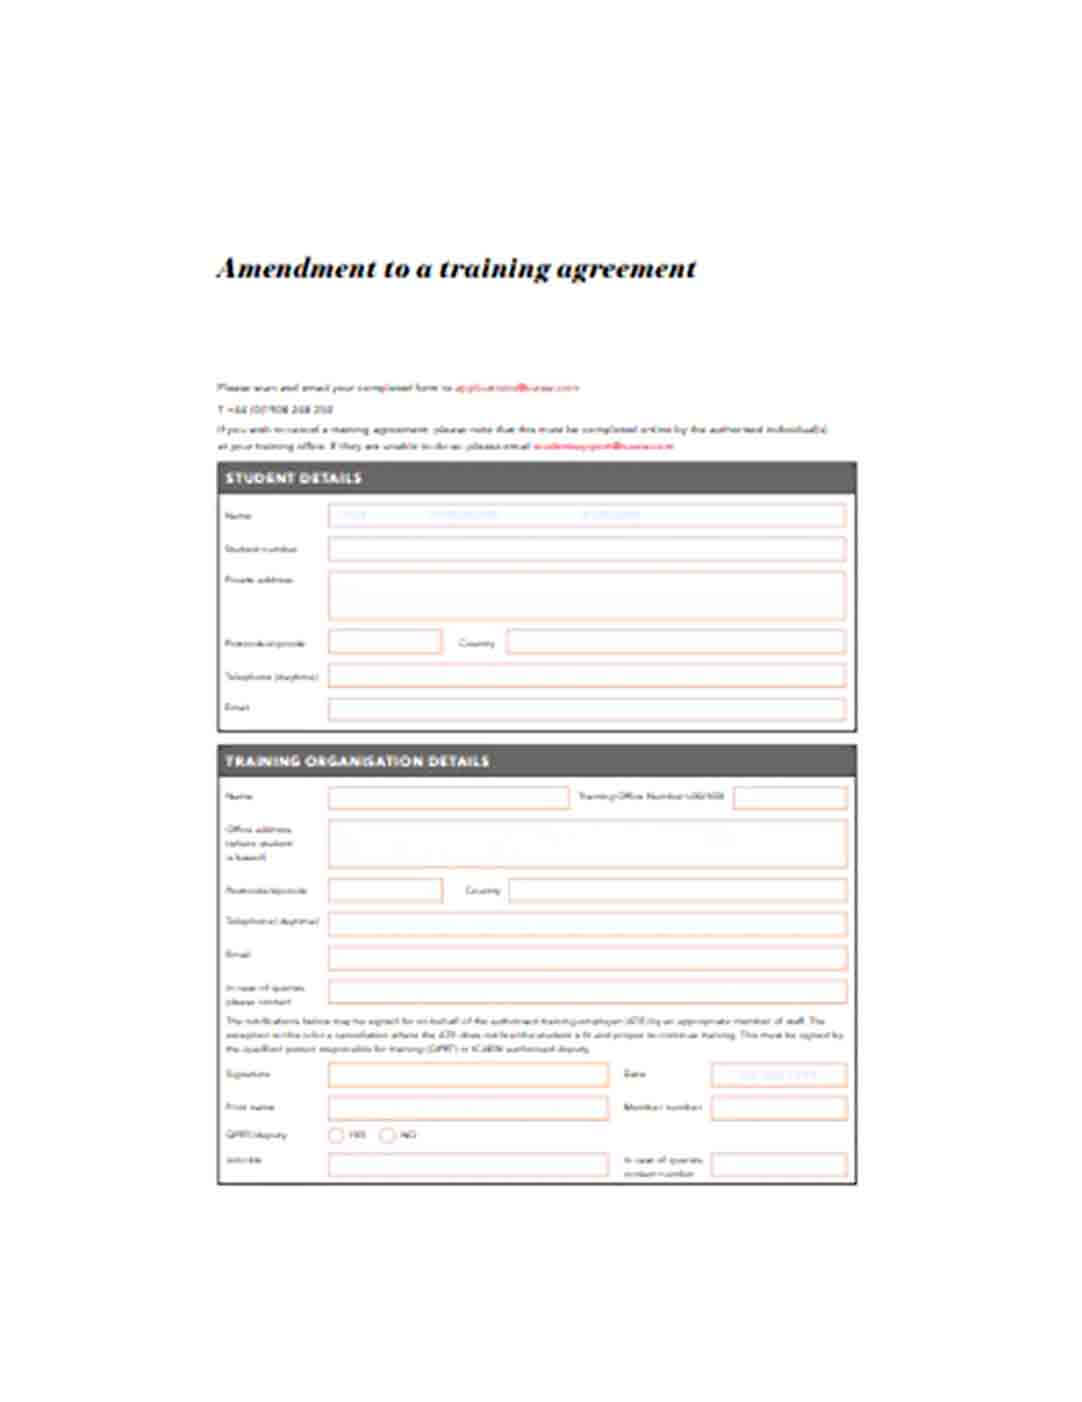 Sample Amendment to a Training Agreement Template